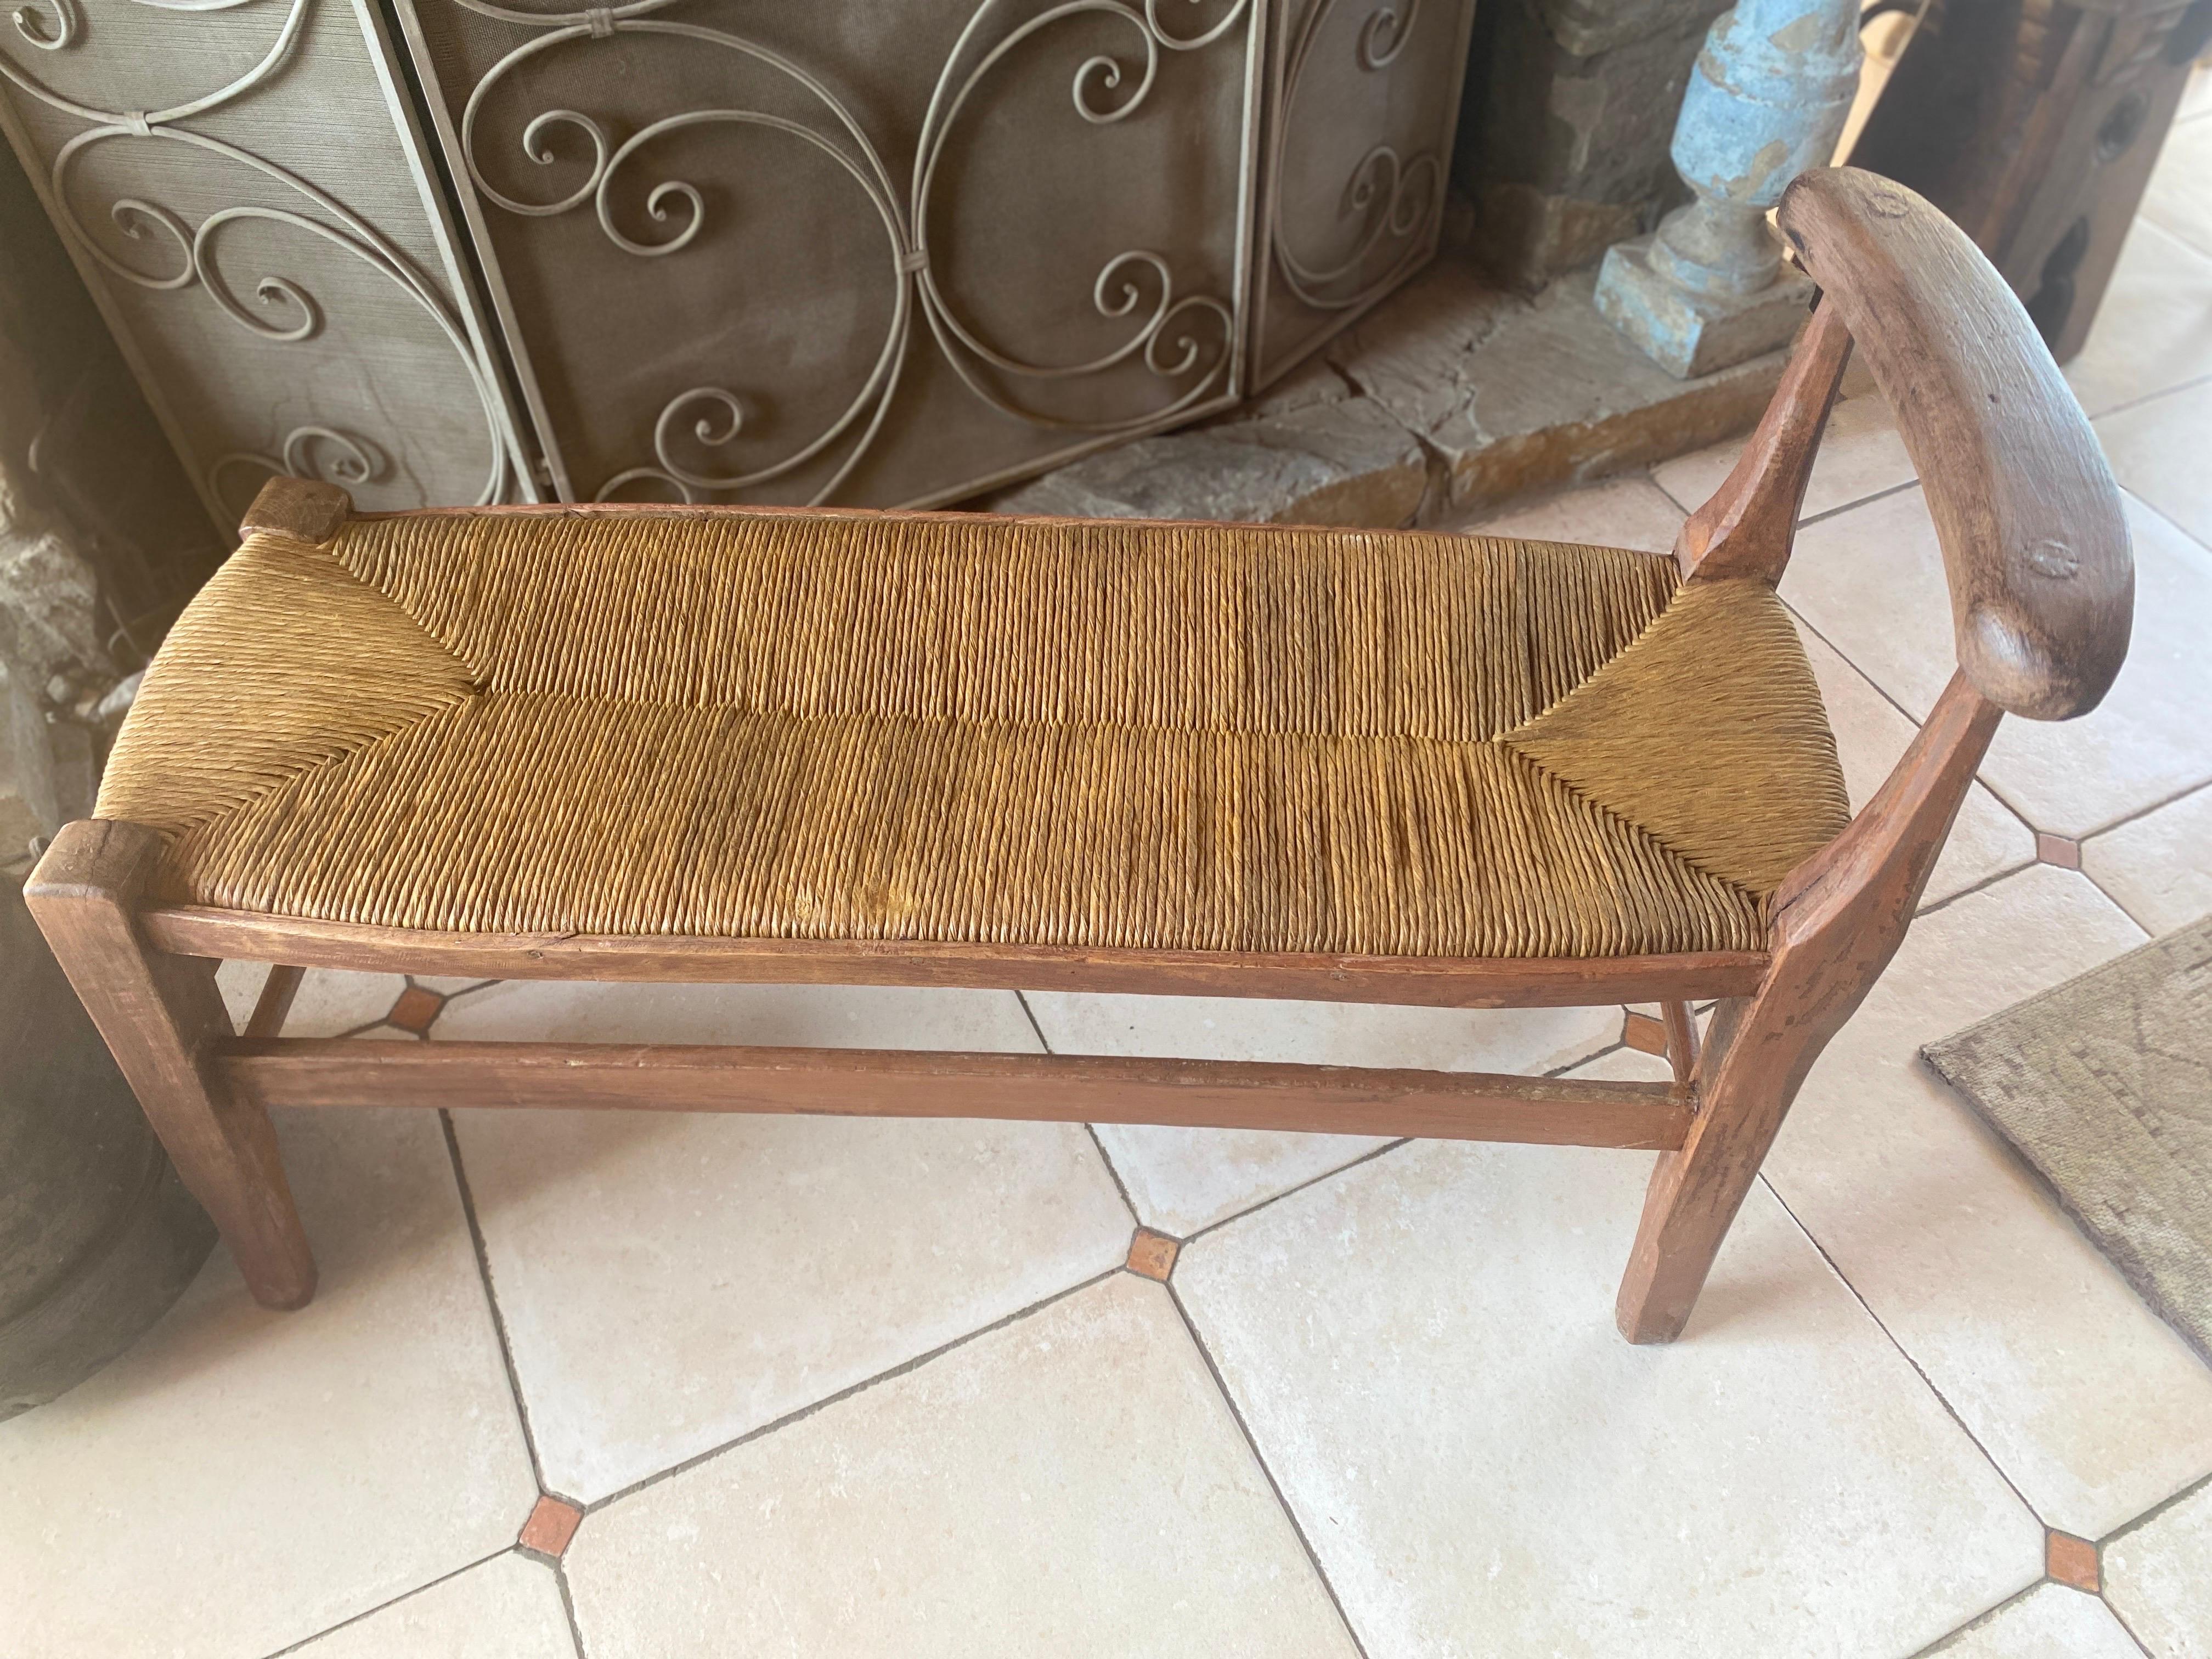 Walnut Cantou ( fireplace) bench dating 18th century south France original patina  For Sale